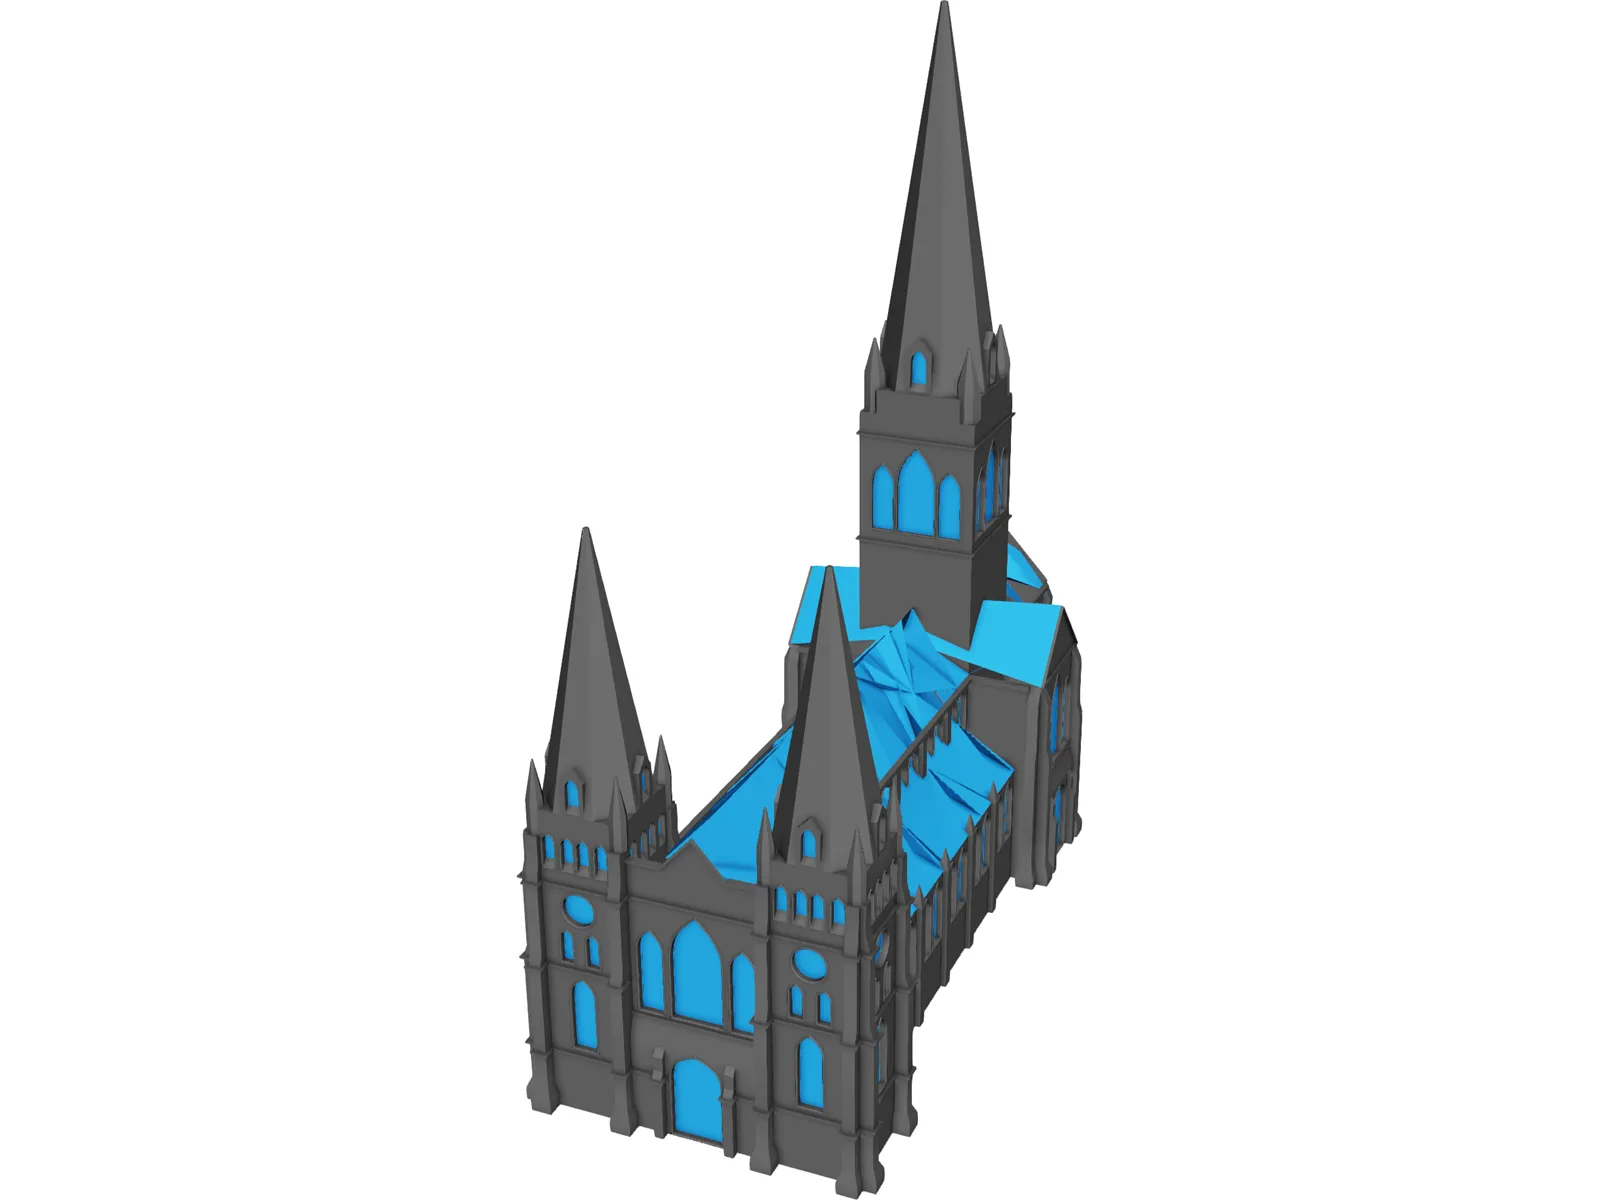 St. Pauls Cathedral 3D Model